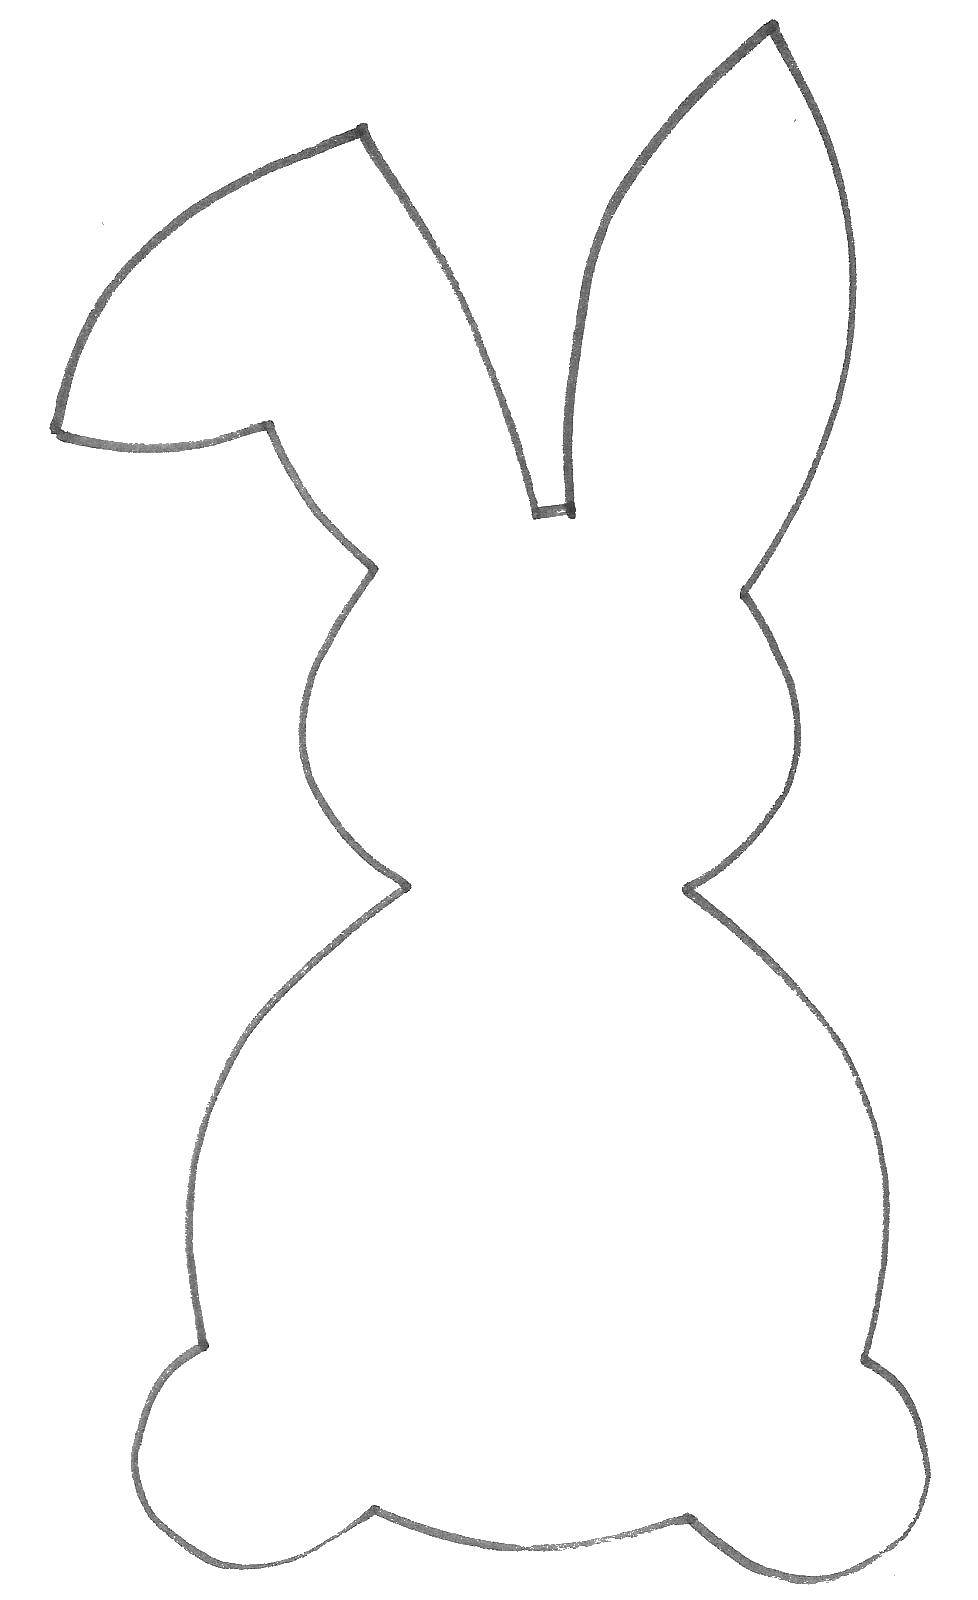 Coloring The outline of a hare.. Category The contour of the hare to cut. Tags:  Animals, Bunny.